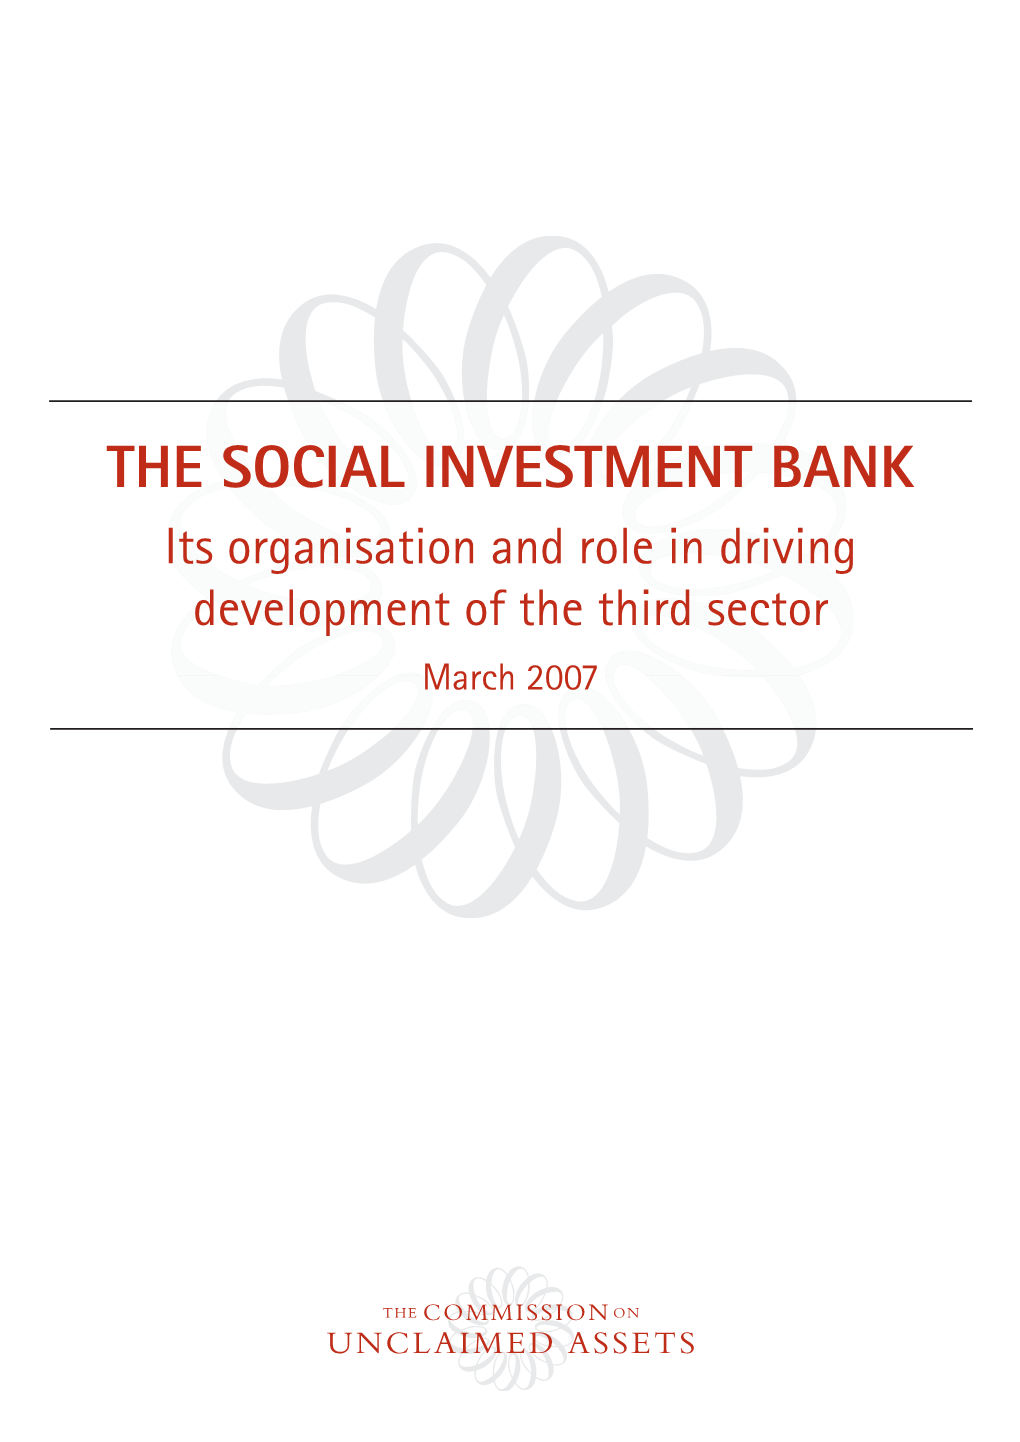 The Social Investment Bank